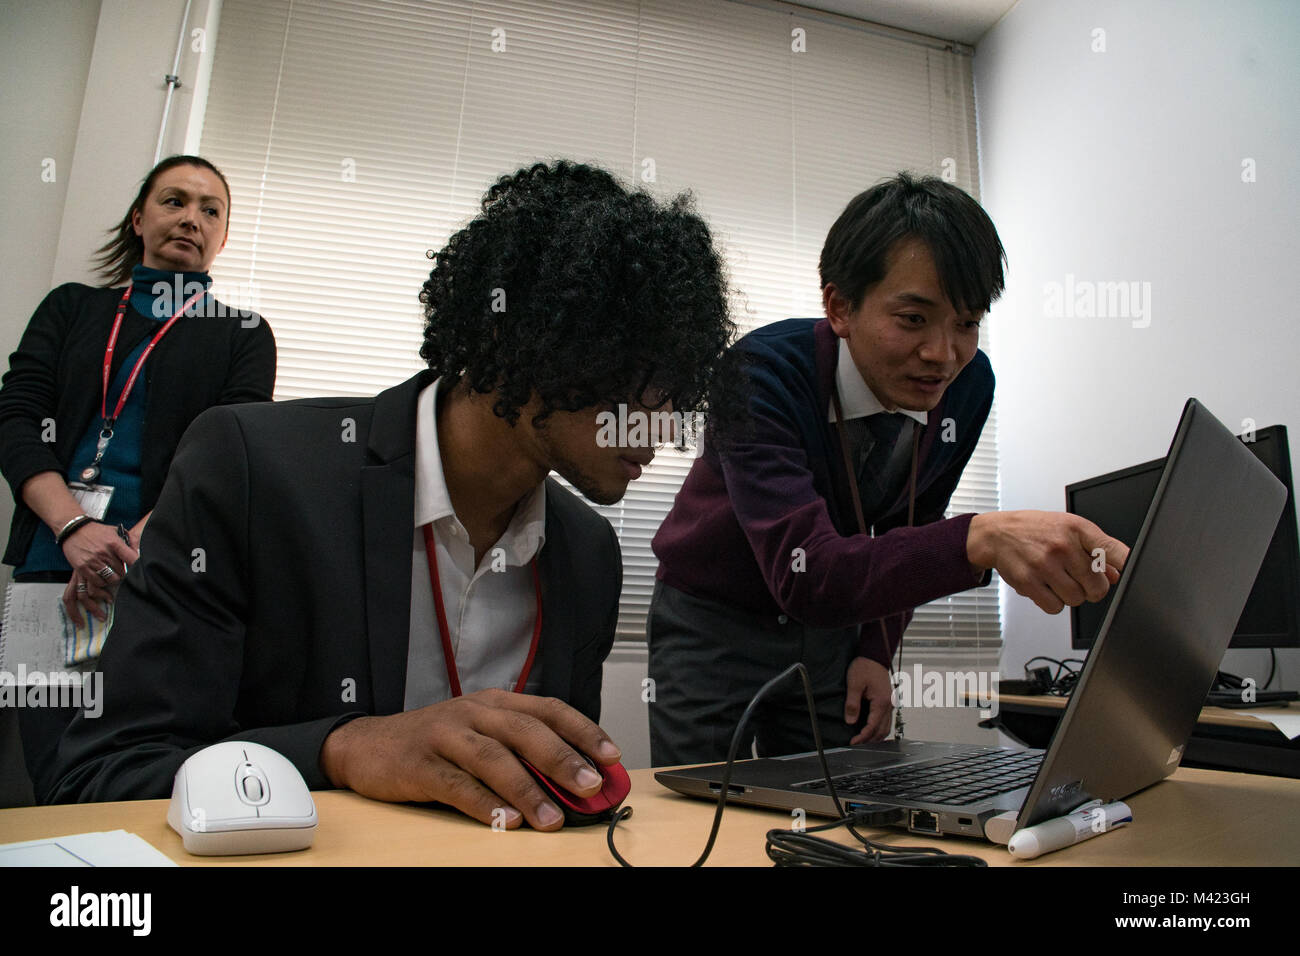 Kenzo Tanaka, right, an architectural engineer with Chuden Engineering Consultants (CEC), helps David Shoebrook, a Matthew C. Perry High School student from Marine Corps Air Station Iwakuni, Japan, while using an architectural computer program at CEC’s facility in Hiroshima, Feb. 8, 2018. The Defense Policy Review Initiative (DPRI) scheduled a day with CEC to host their first American visitors, which included five Matthew C. Perry High School students, DPRI employees and a Matthew C. Perry teacher, for a tour of the building and to visit with their employees to see how they work. (U.S. Marine  Stock Photo